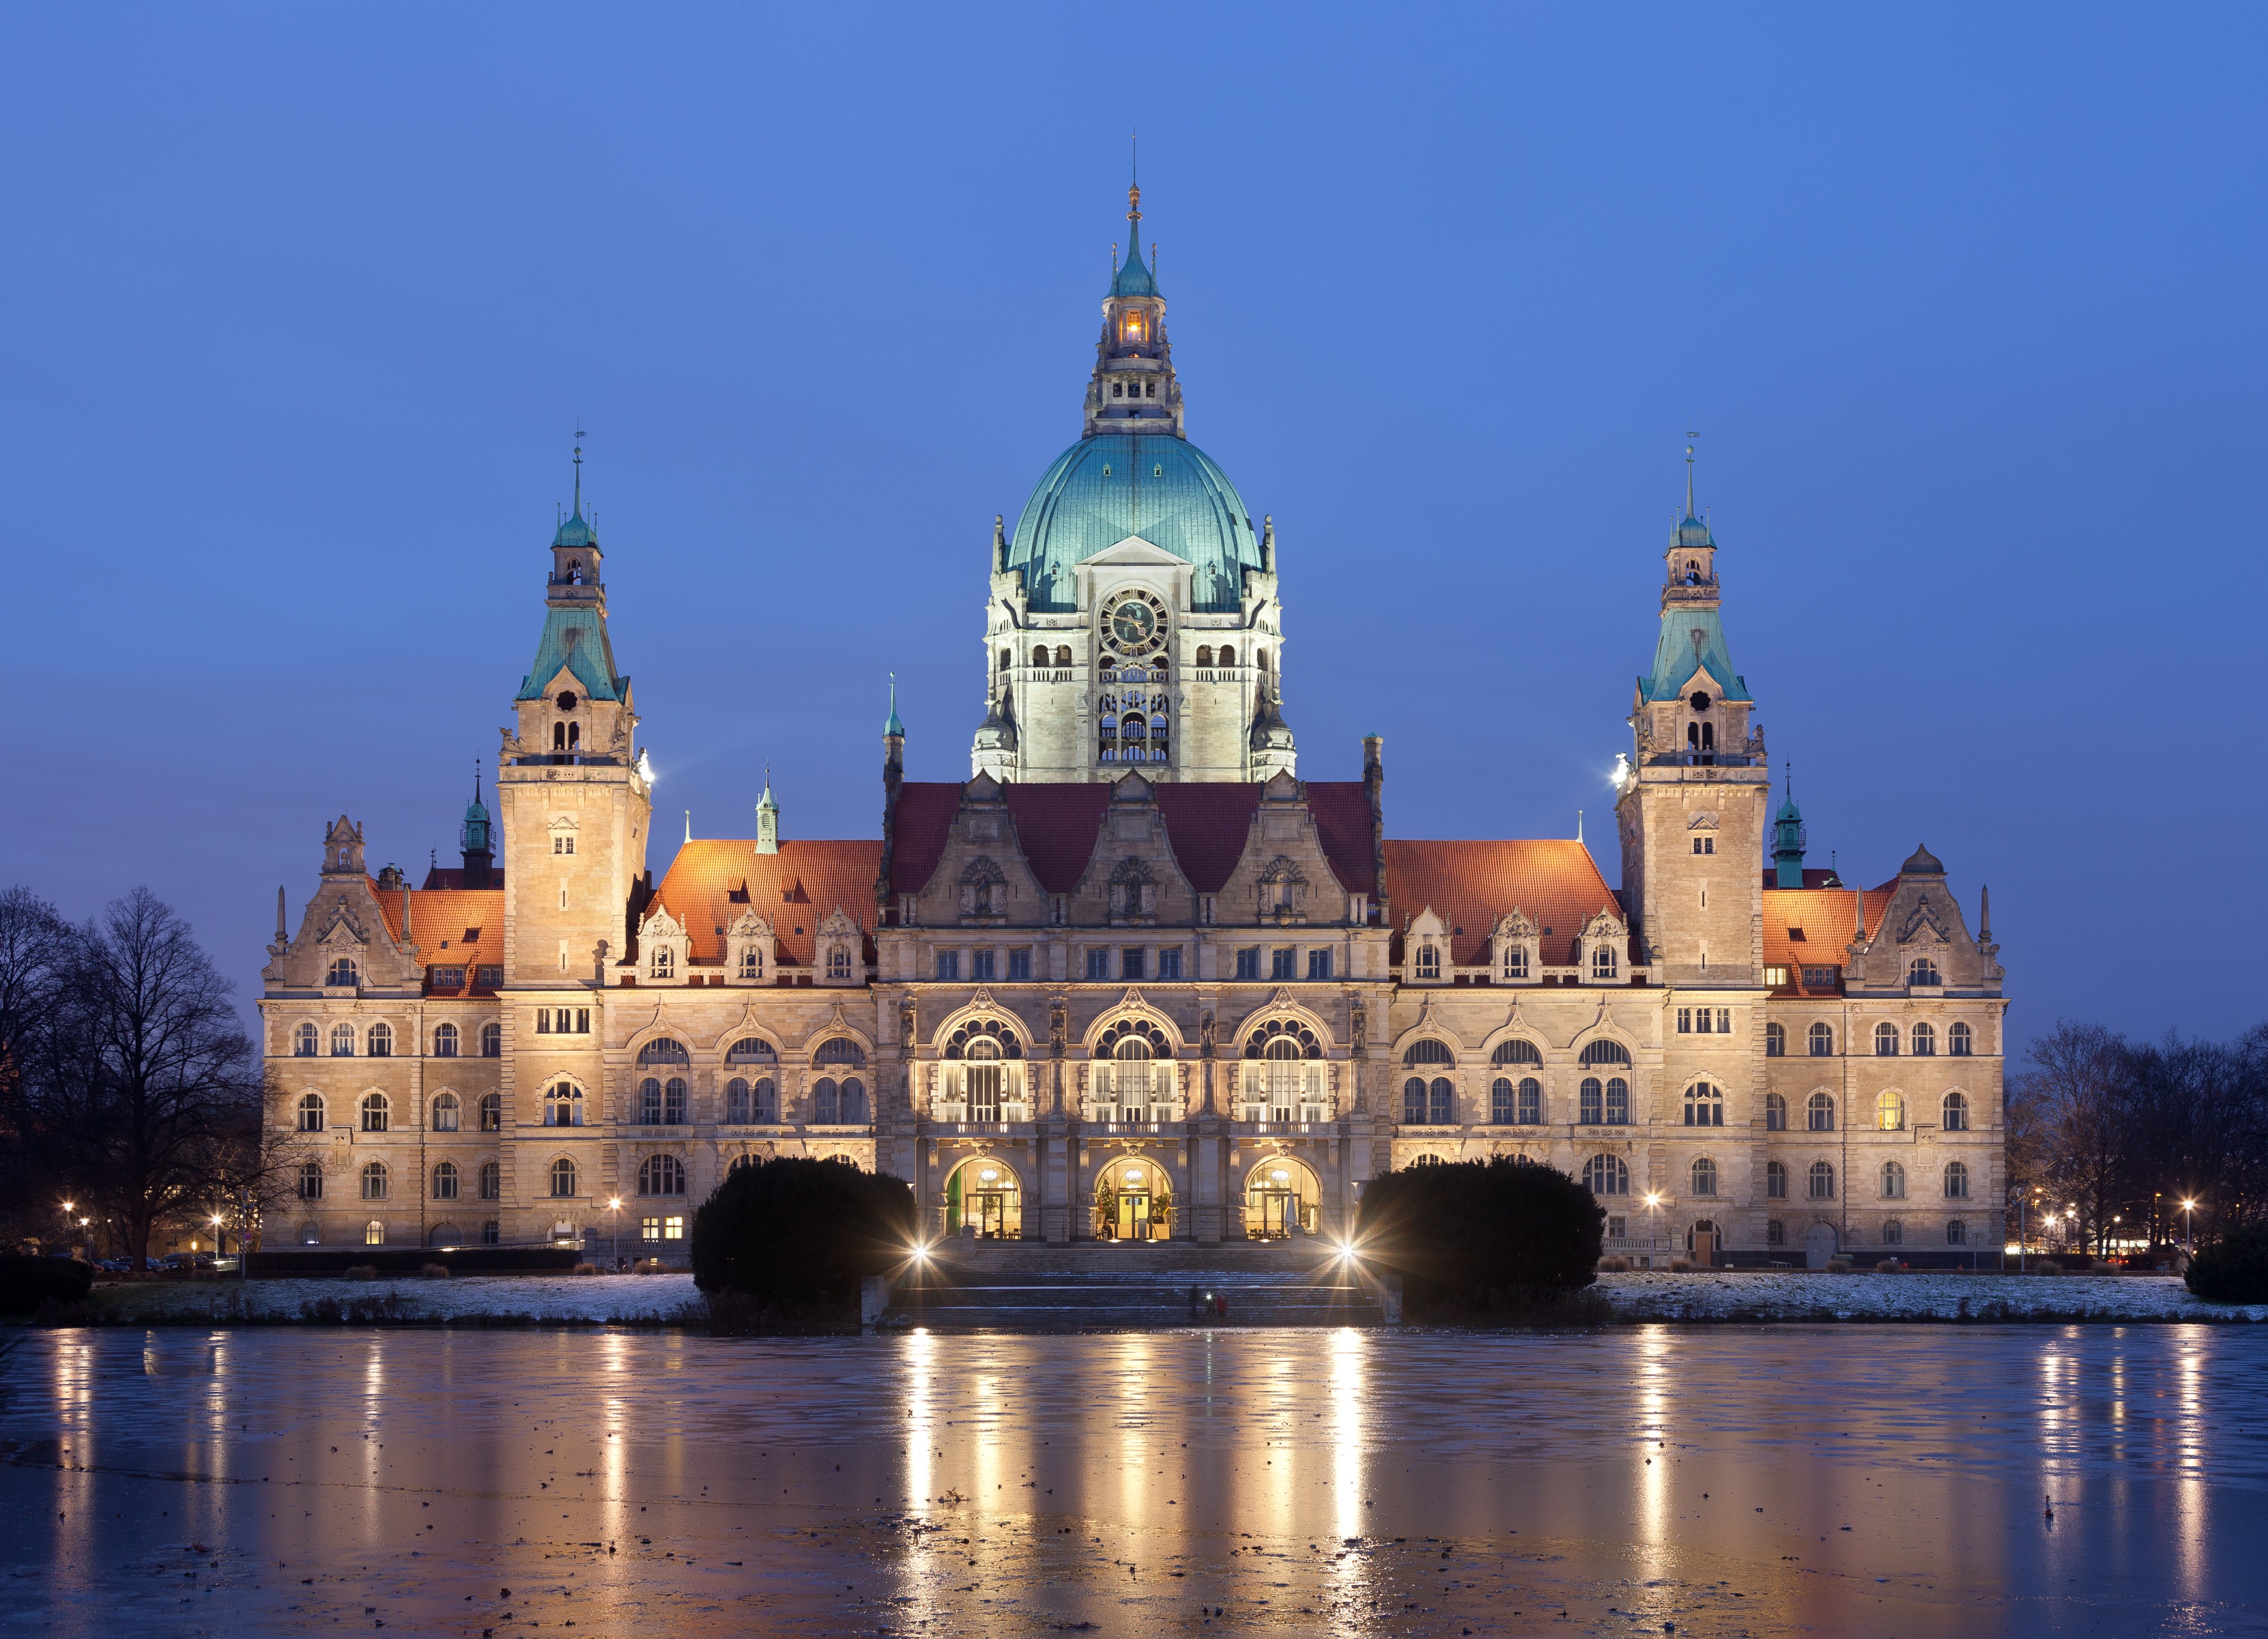 Neues Rathaus Hannover abends